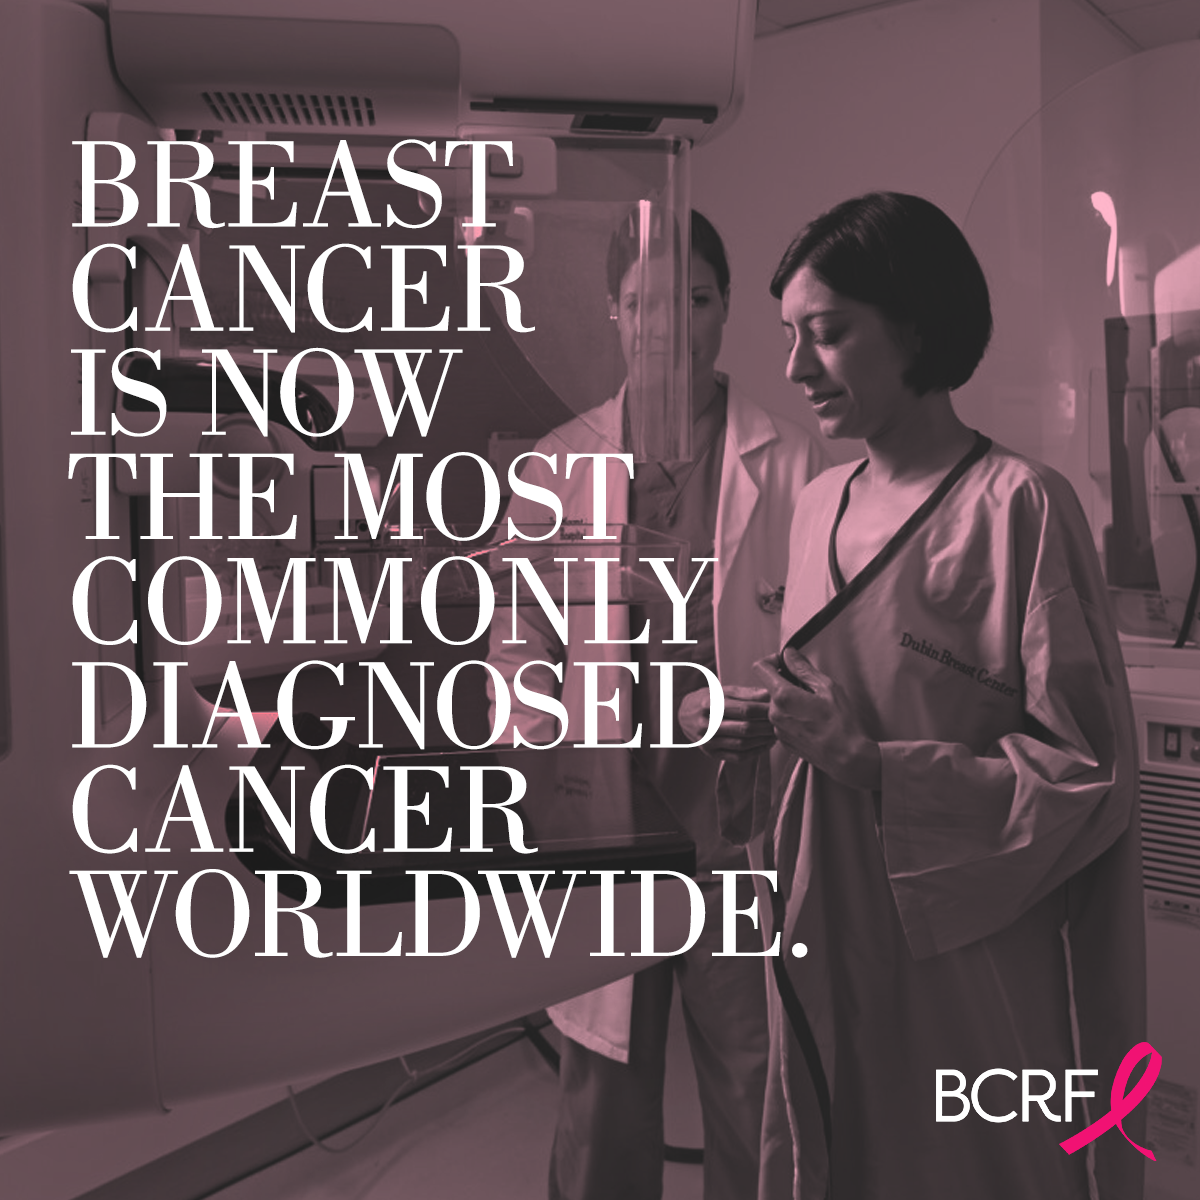 Breast cancer is now the most commonly diagnosed cancer worldwide